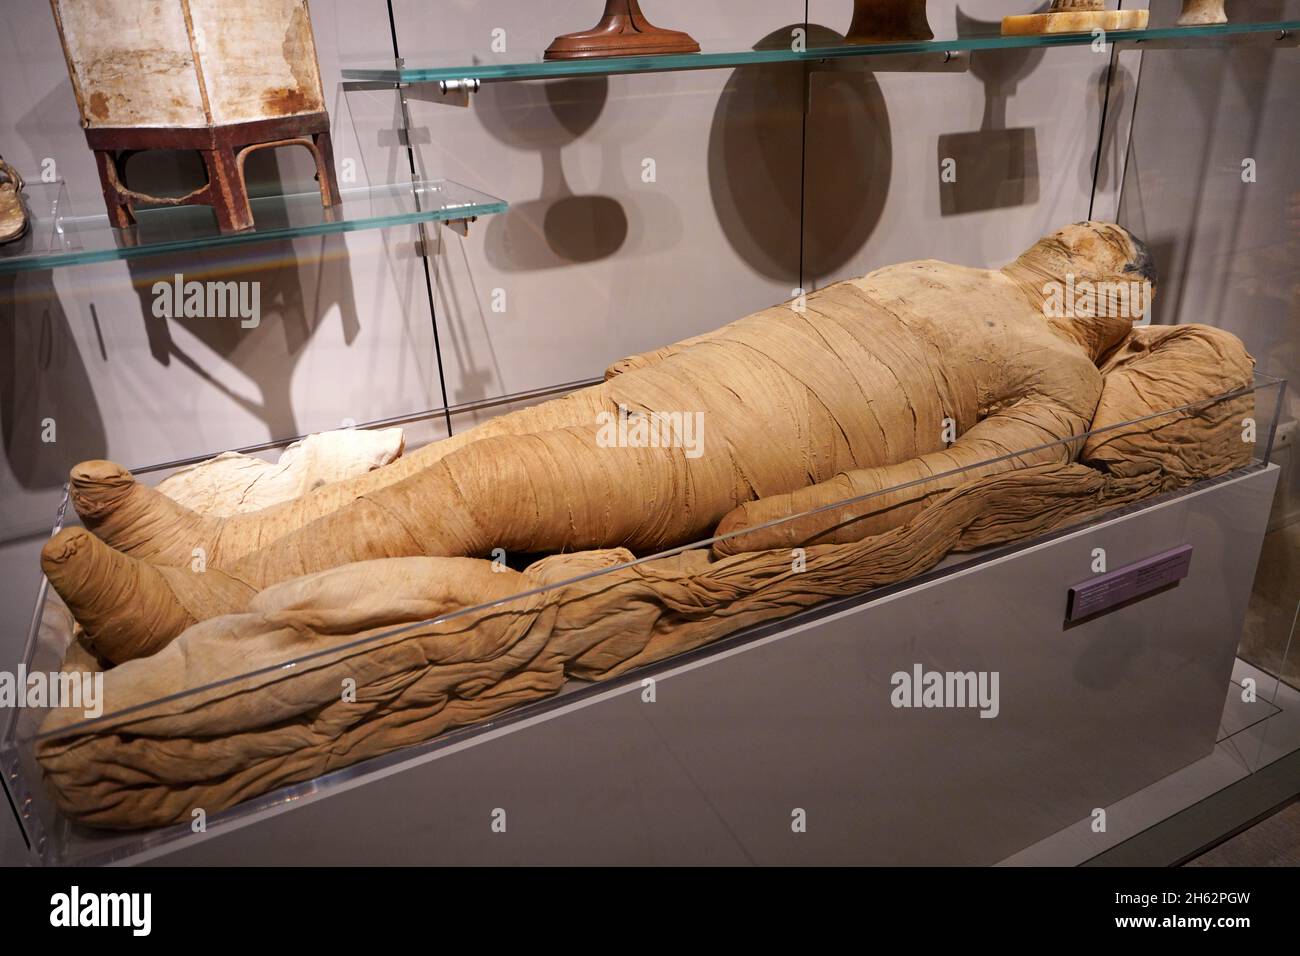 TURIN, ITALY - AUGUST 19, 2021: Mummy in a lying position. Mummification of one body during the Egyptian civilization, Egyptian Museum of Turin, Italy Stock Photo